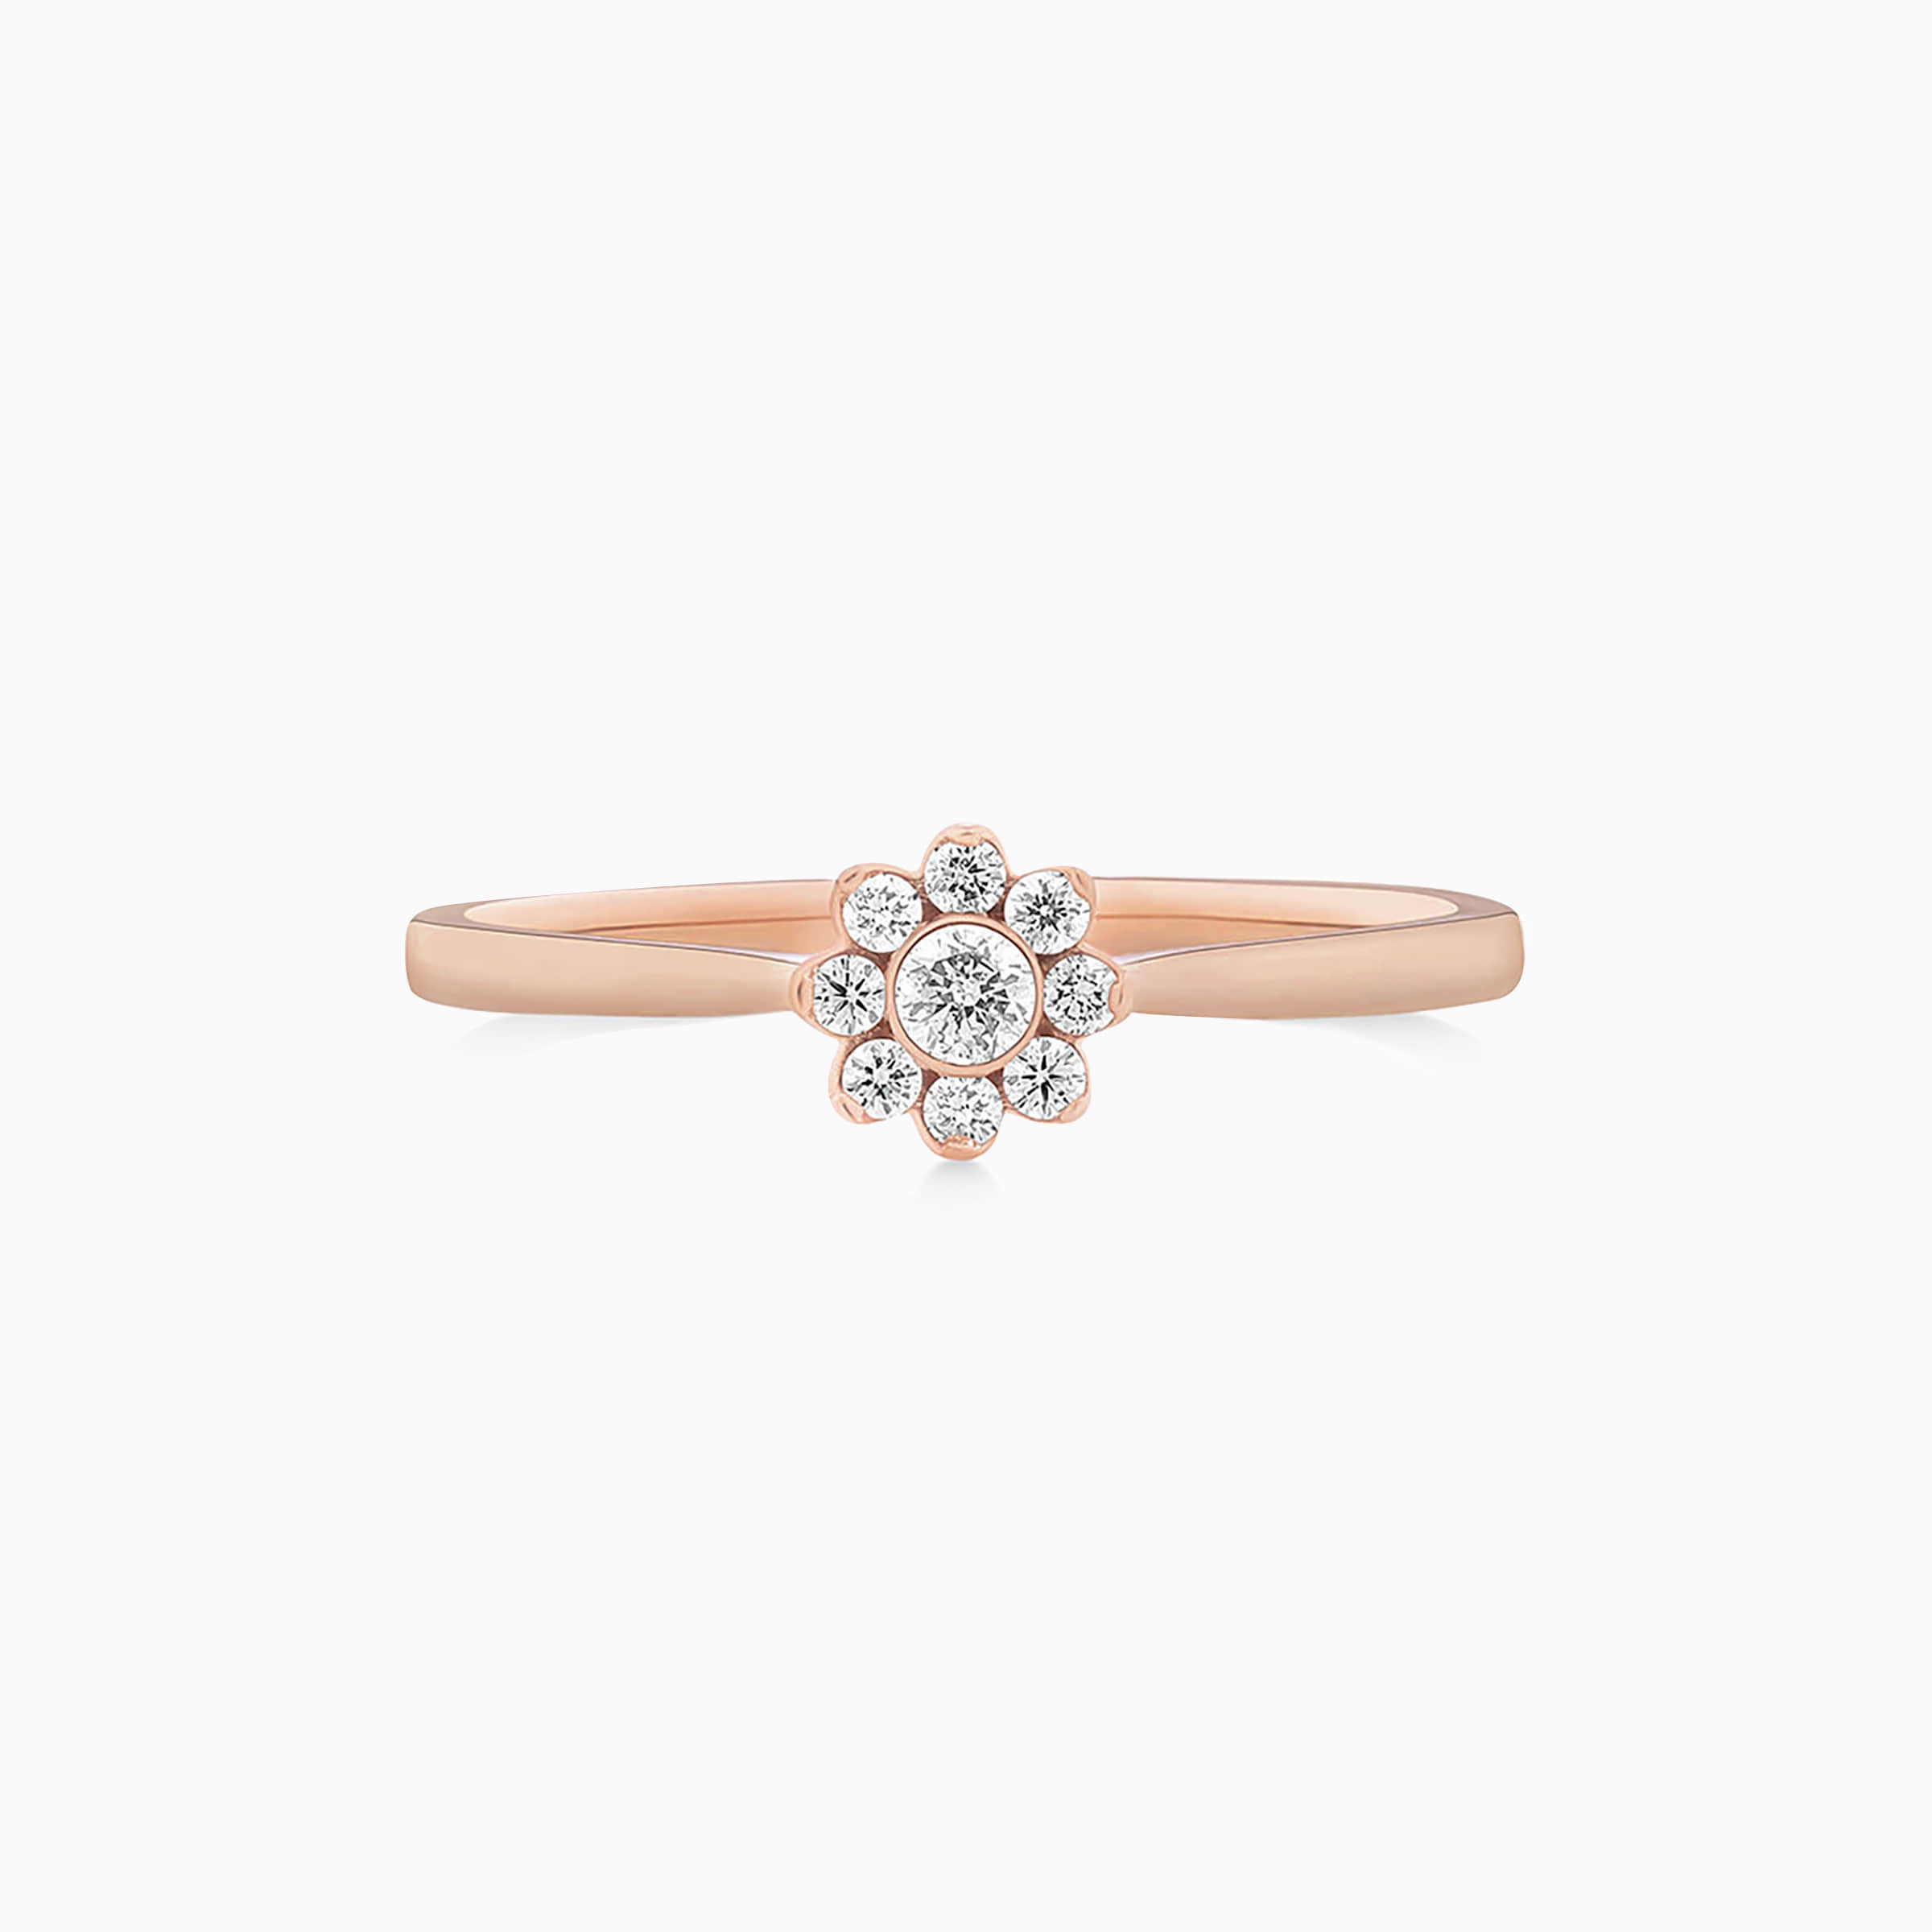 Darry Ring floral halo promise ring in rose gold